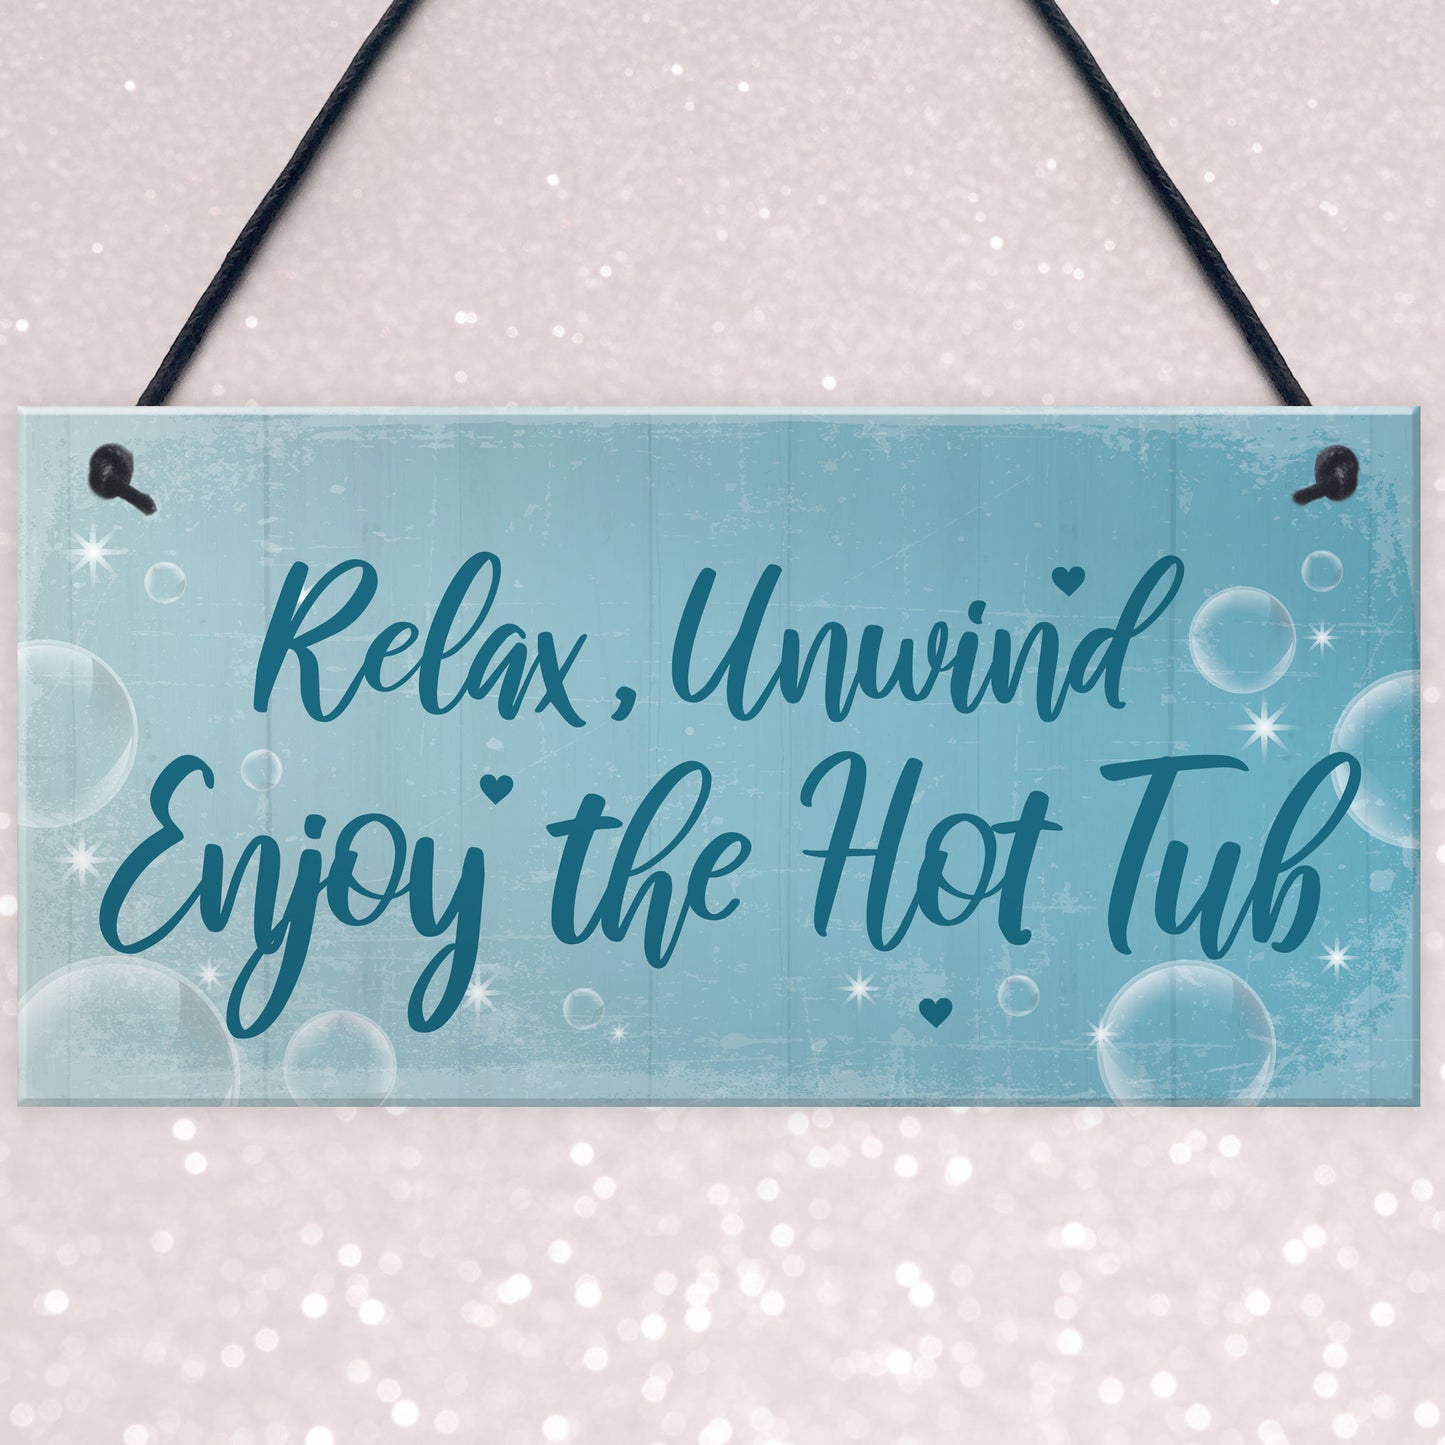 HOT TUB SIGN Hanging Plaque Hot Tub Rules Sign Garden Plaque